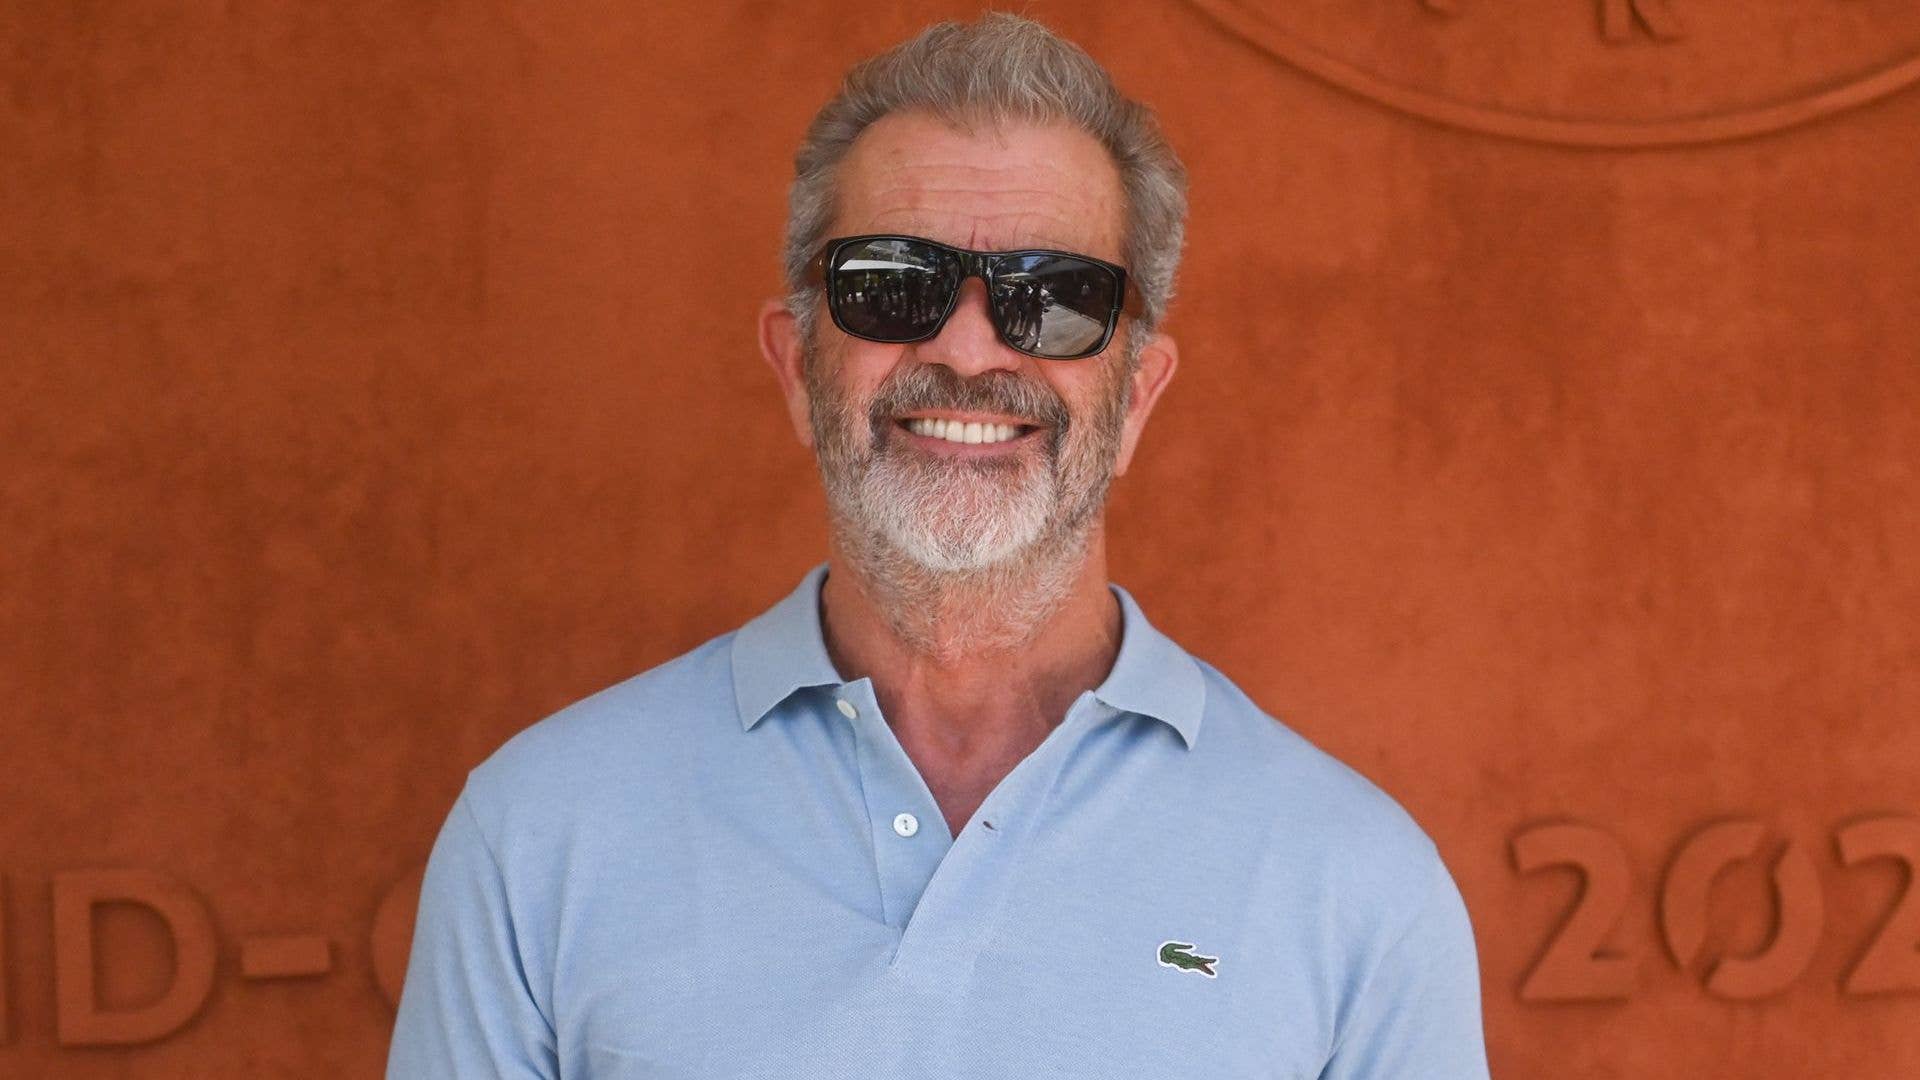 Mel Gibson at the French Open 2021